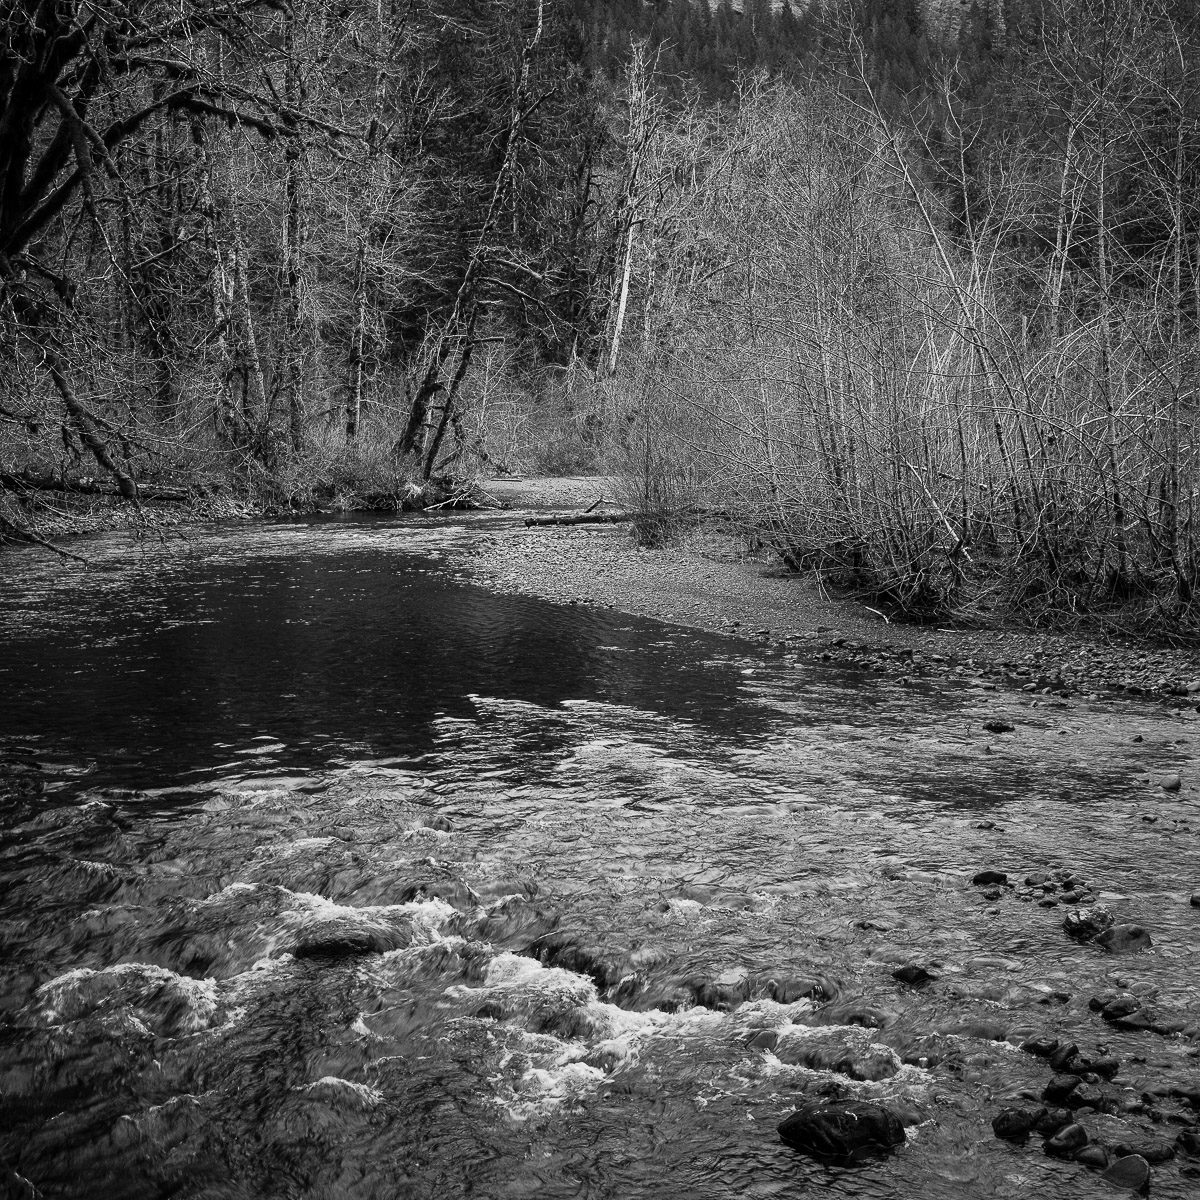 A black and white intimate landscape photograph of the Hamma Hamma River in the Olympic National Forest in rural Mason County, Washington.